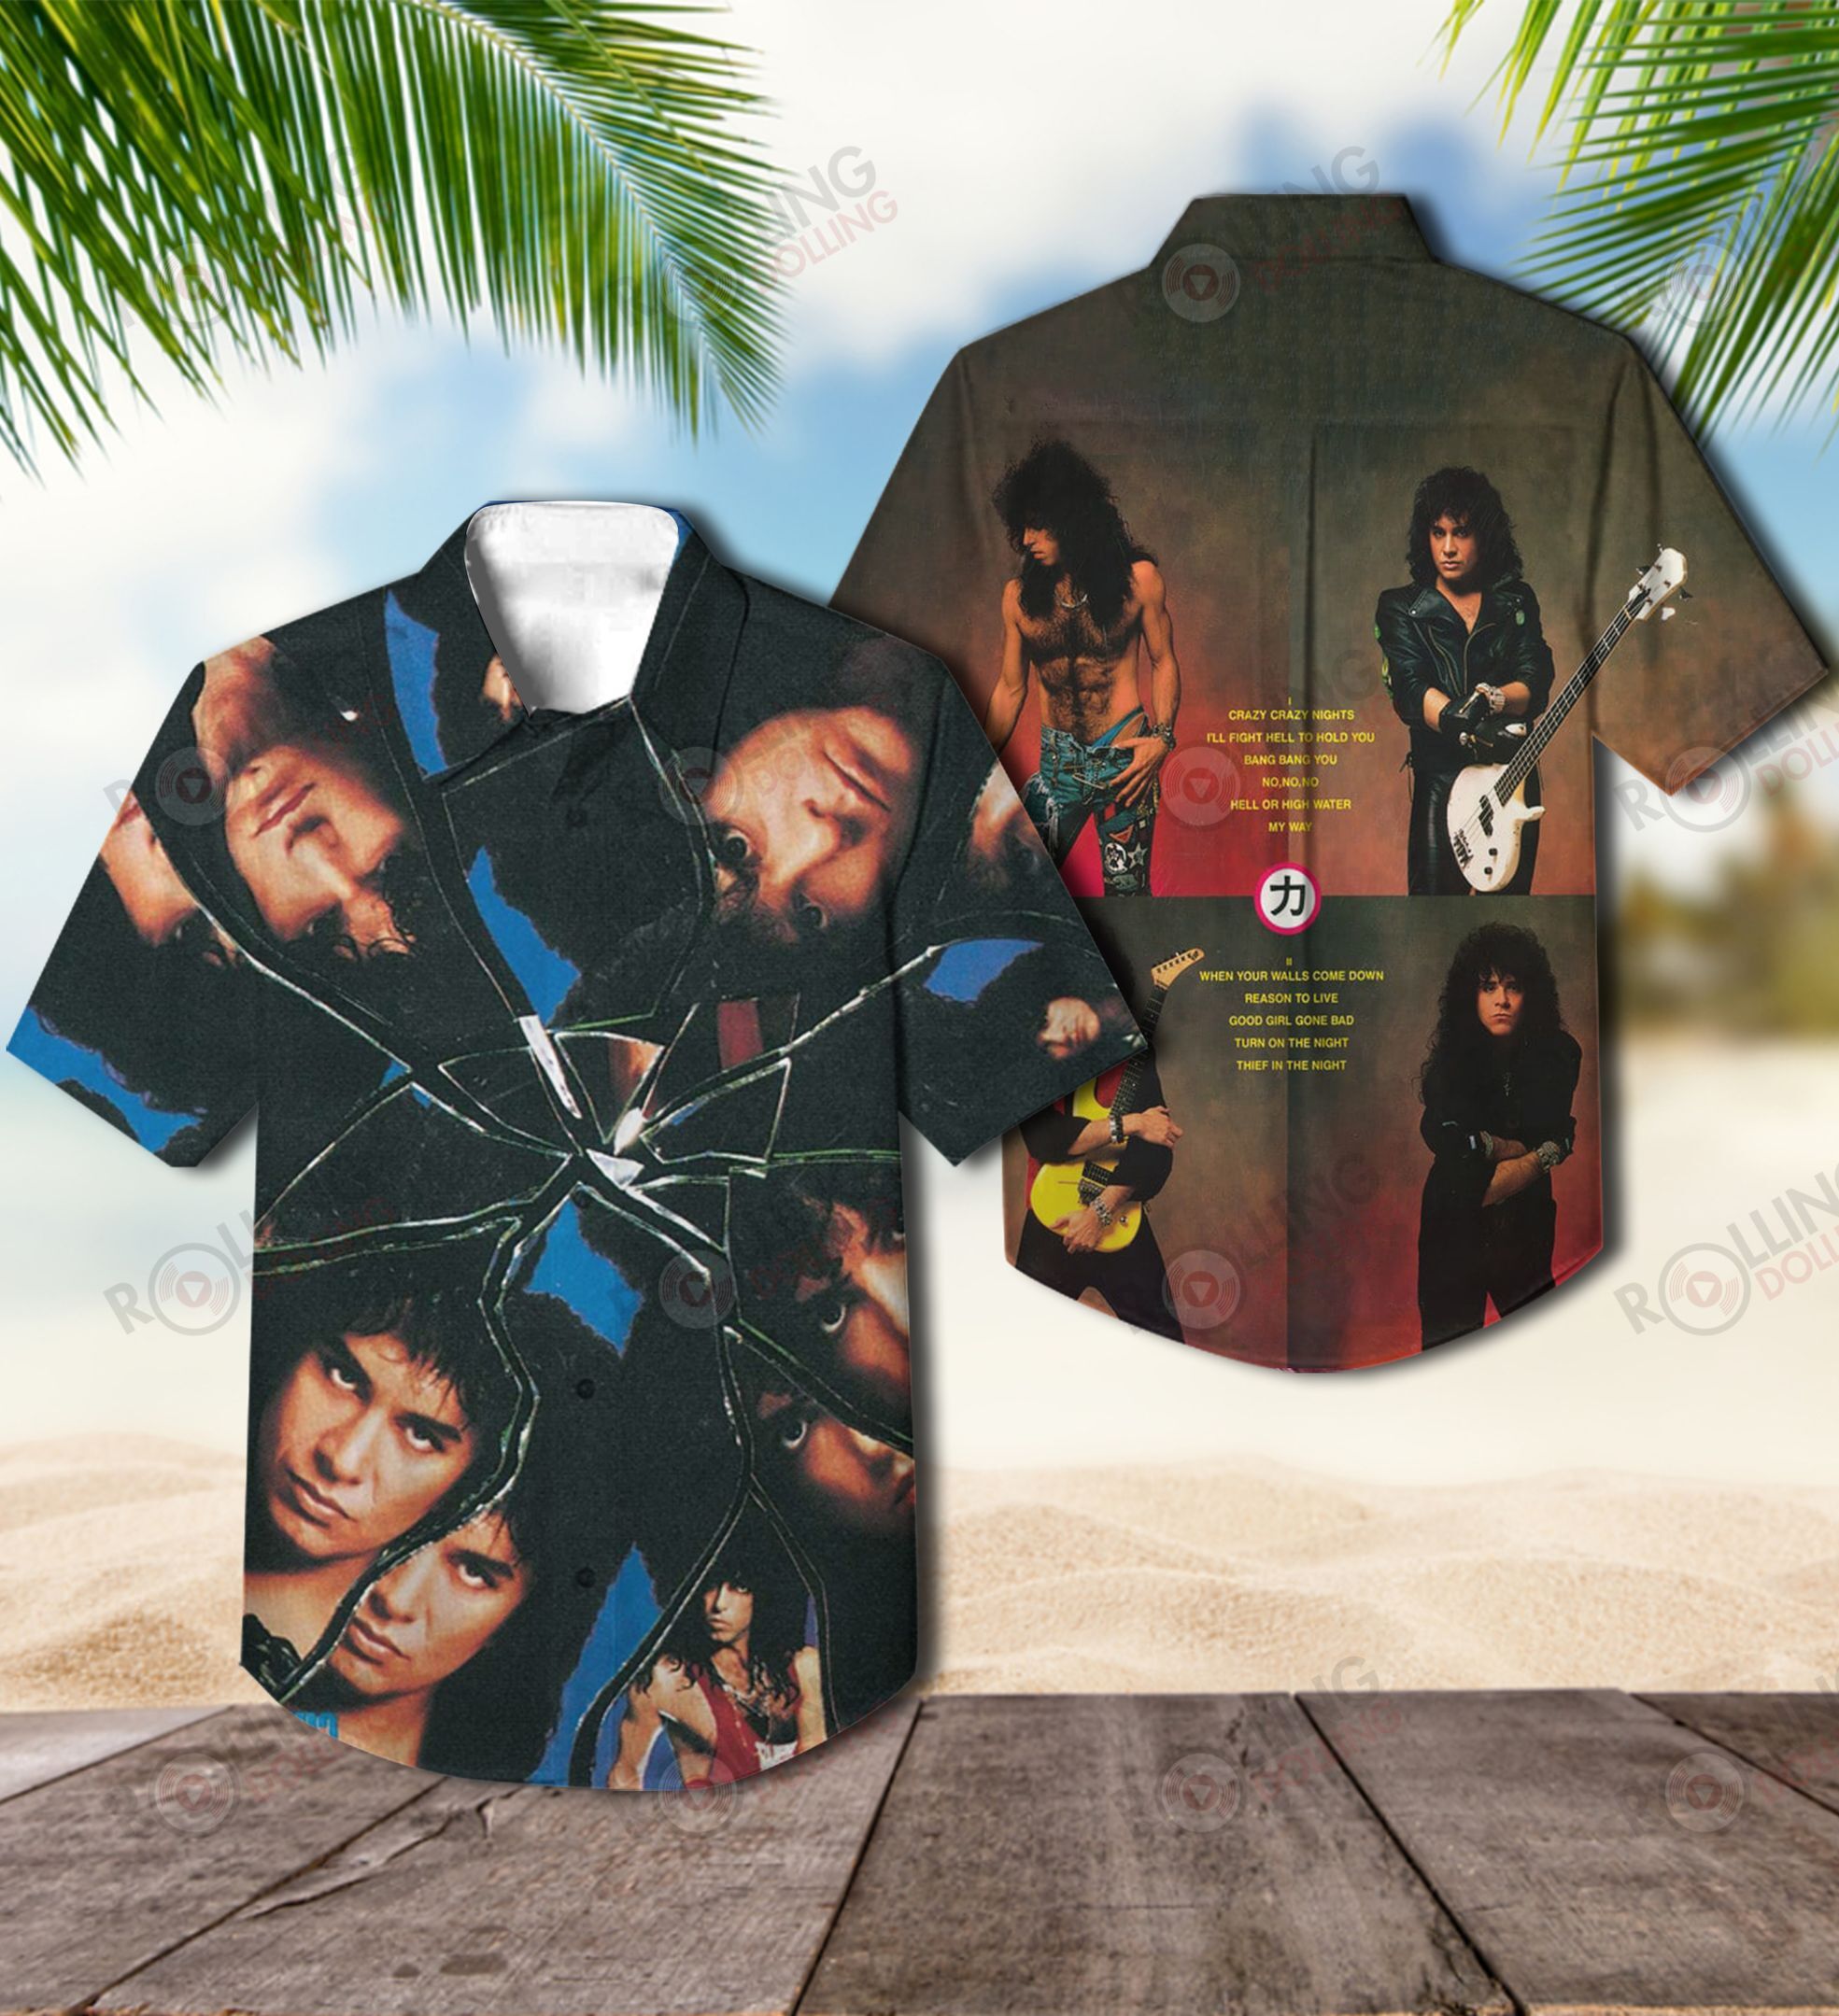 The Hawaiian Shirt is a popular shirt that is worn by Rock band fans 52